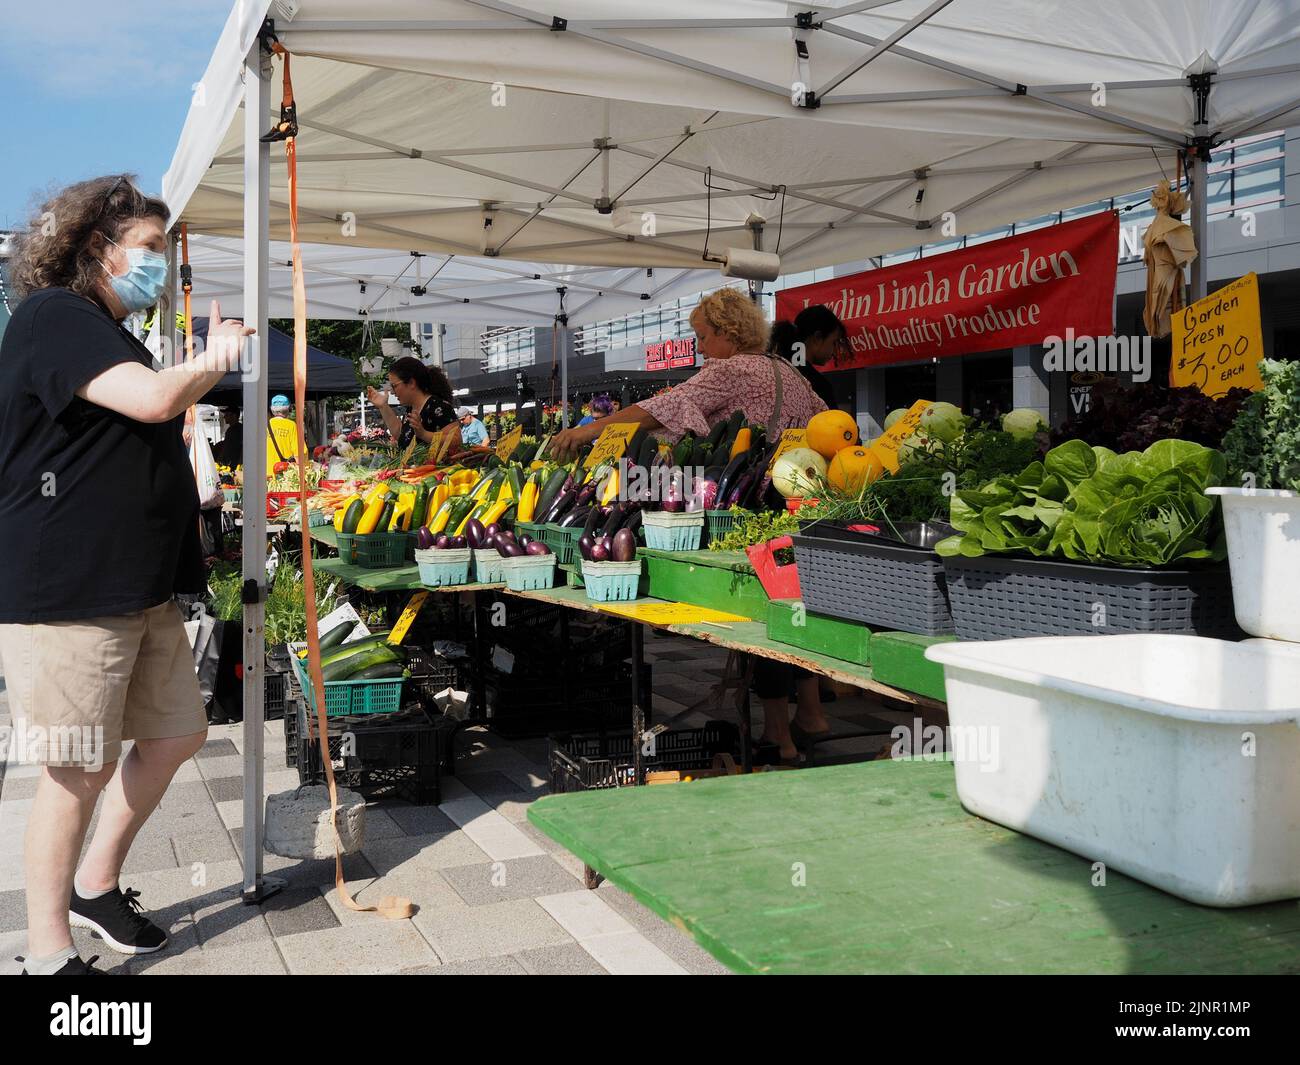 Scenes from the Farmer's Market at Lansdowne Place. Shoppers and sellers interacting at a farm fresh produce stand. Ottawa, ON, Canada. Stock Photo